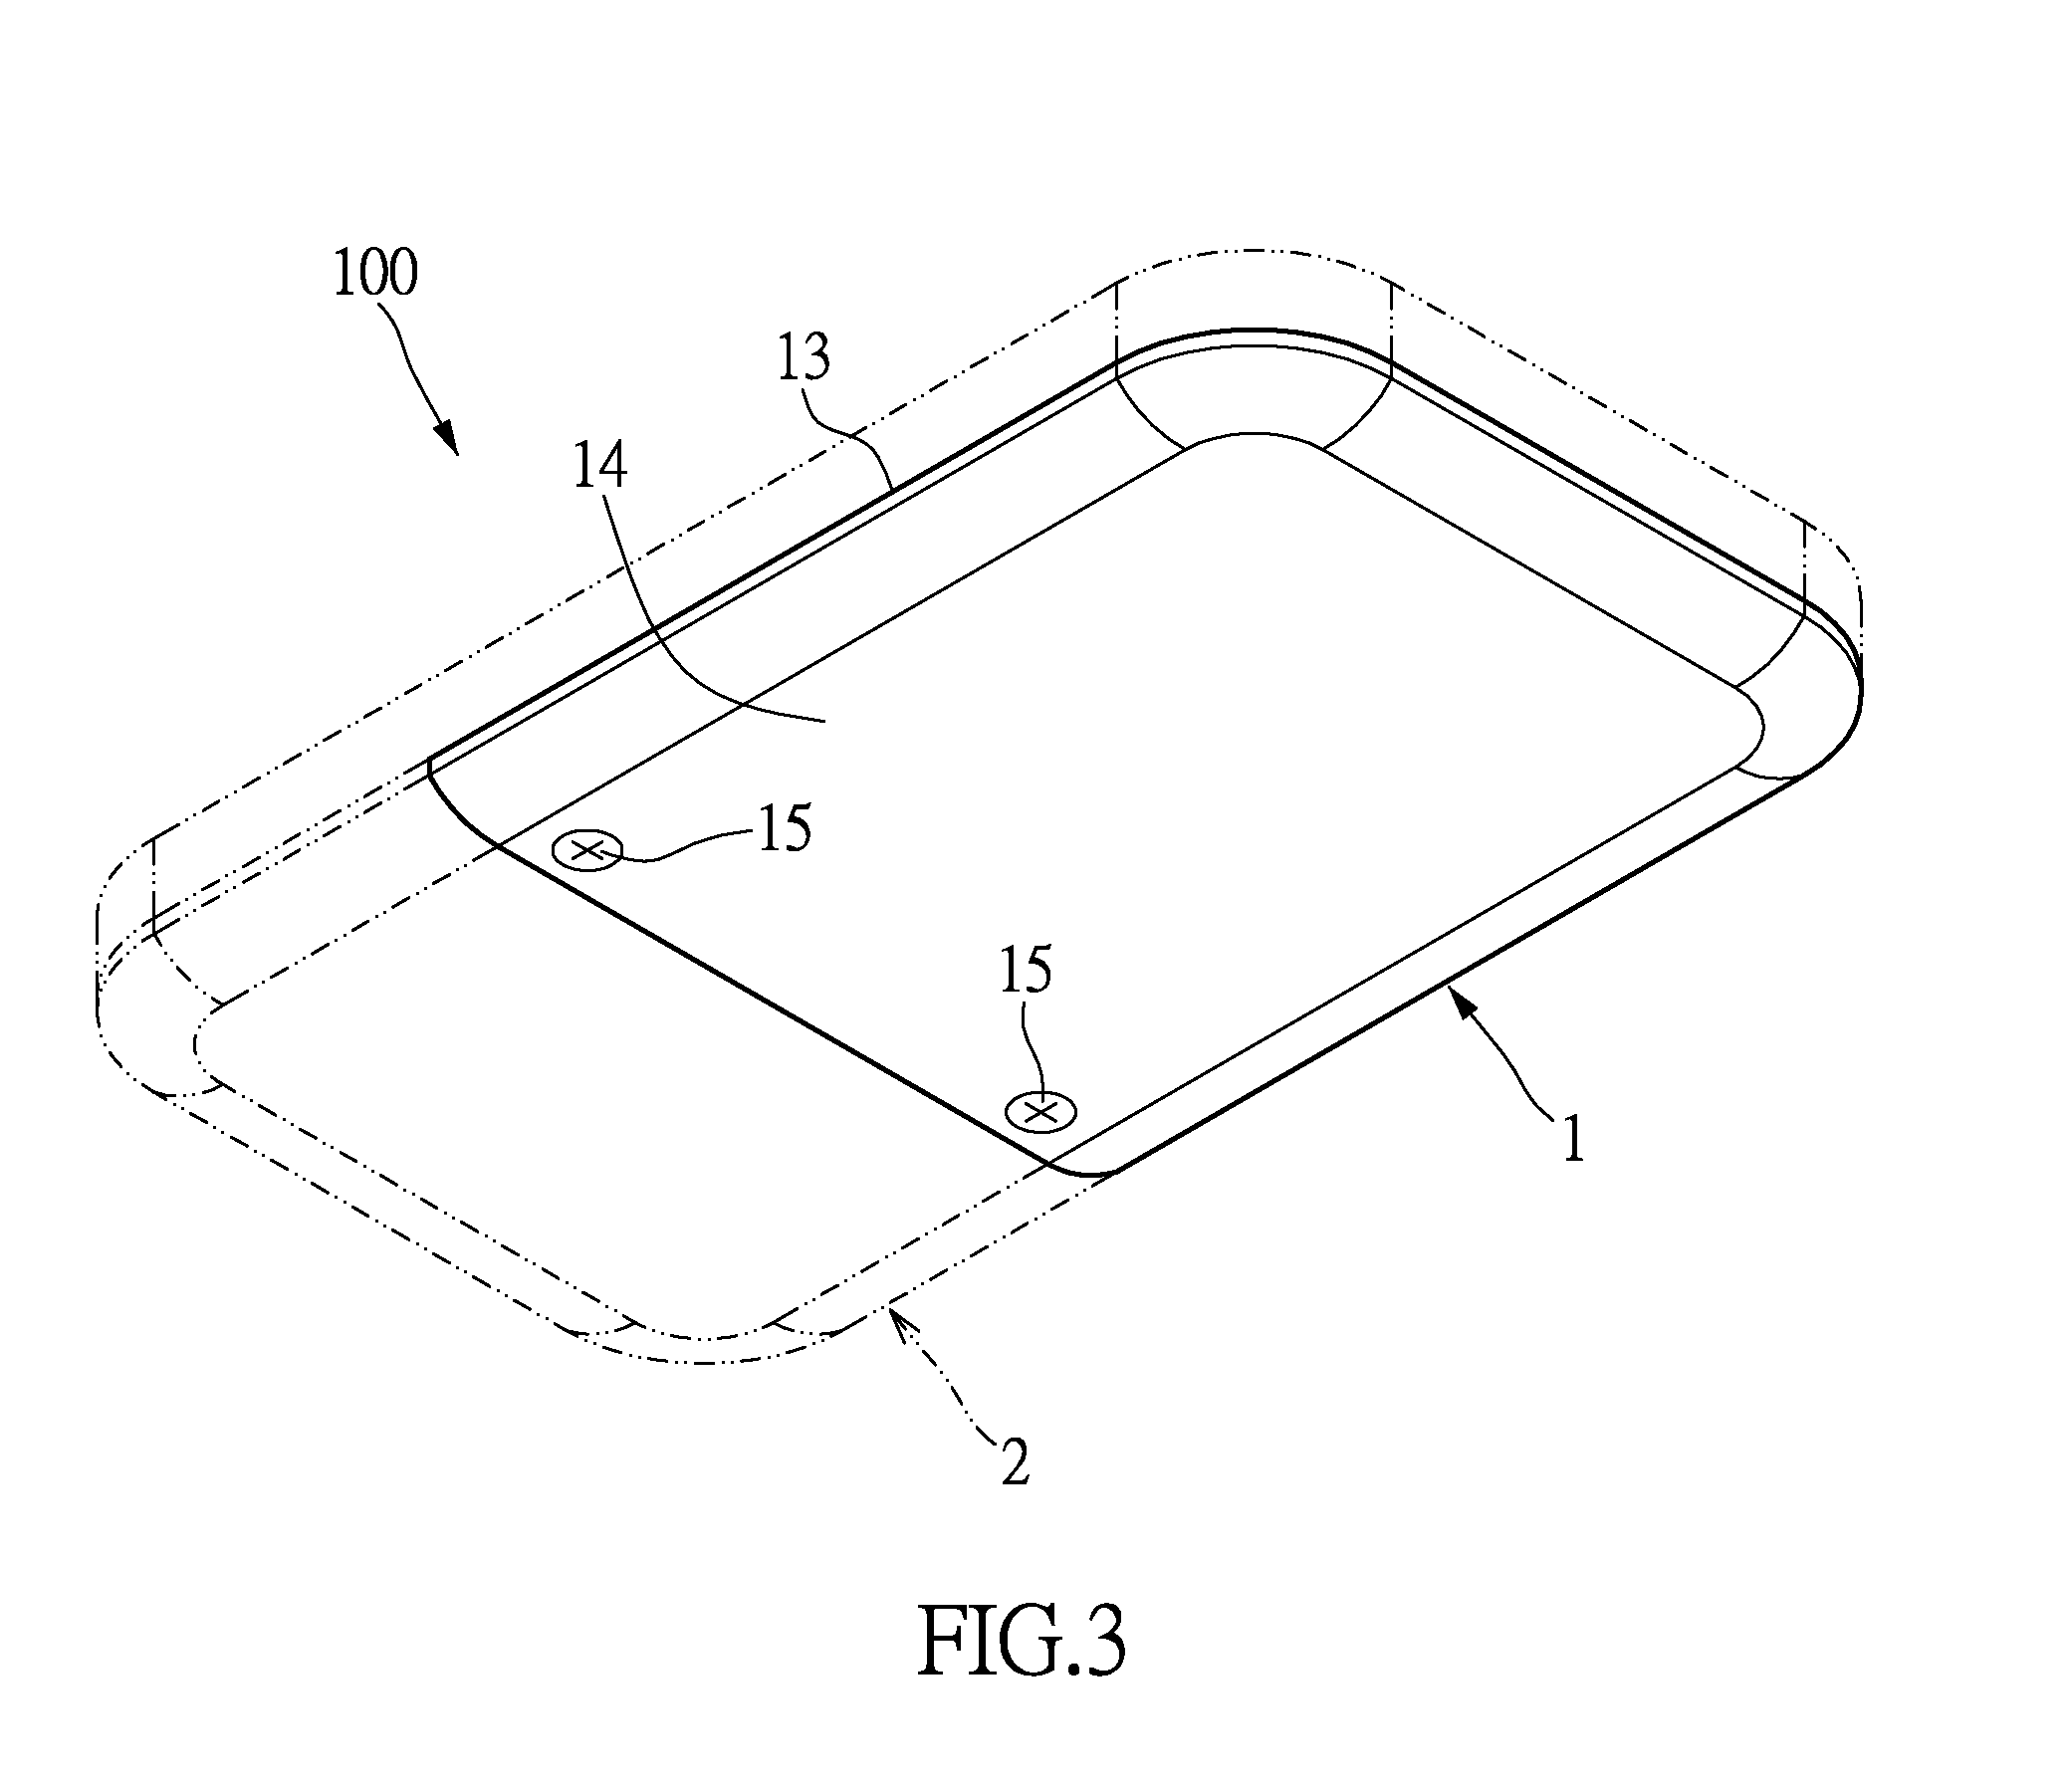 Shell structure for handheld device